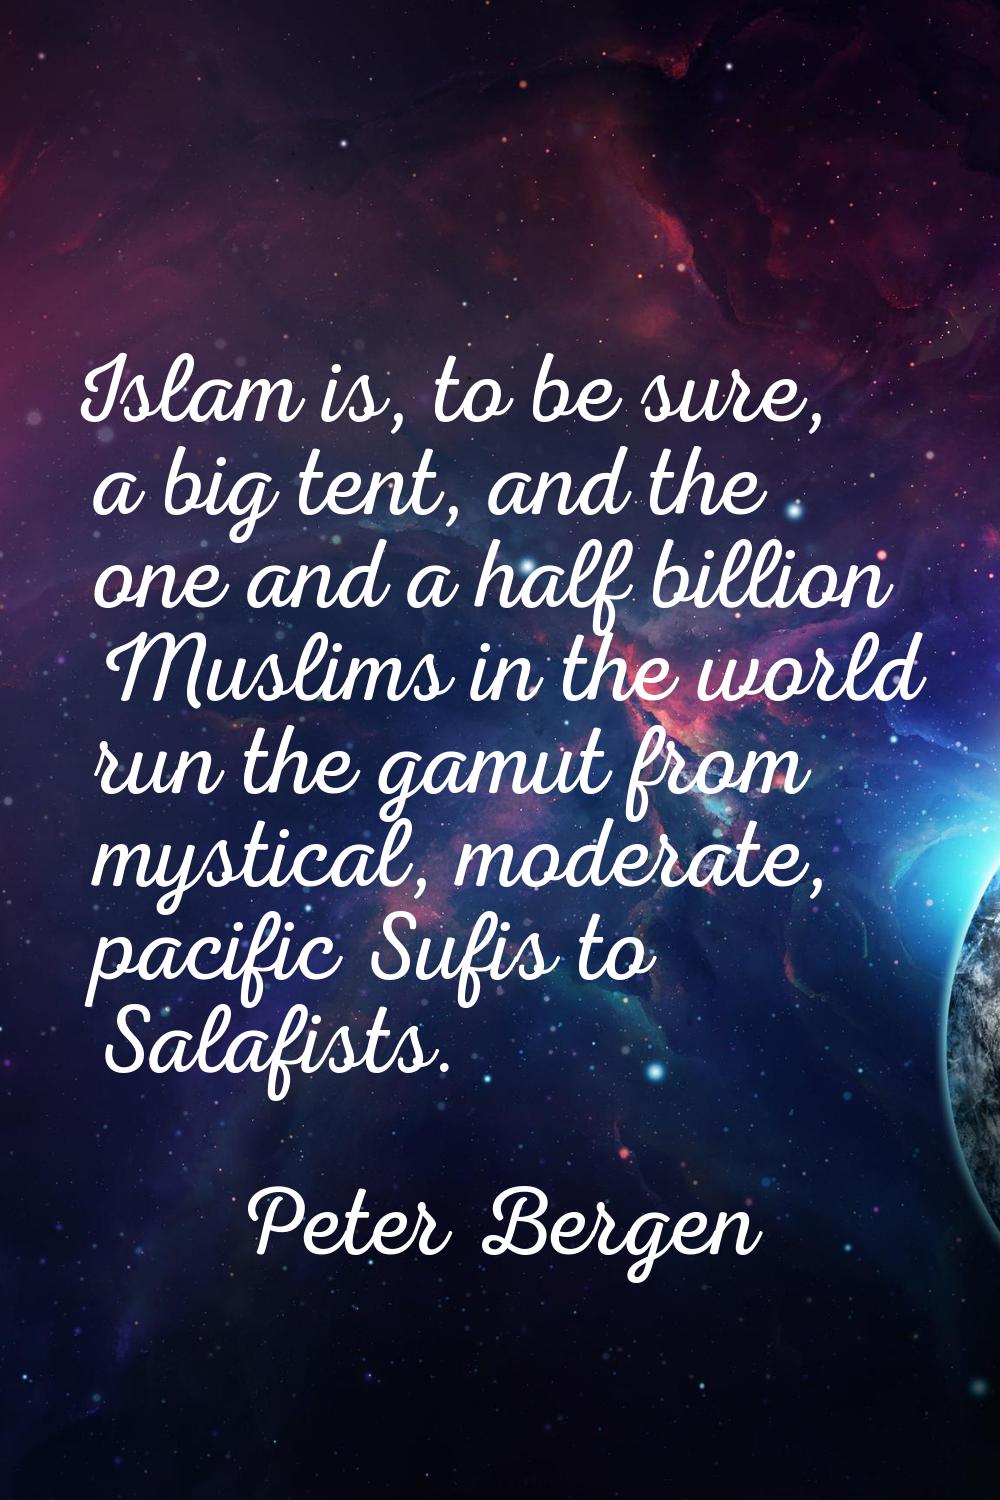 Islam is, to be sure, a big tent, and the one and a half billion Muslims in the world run the gamut